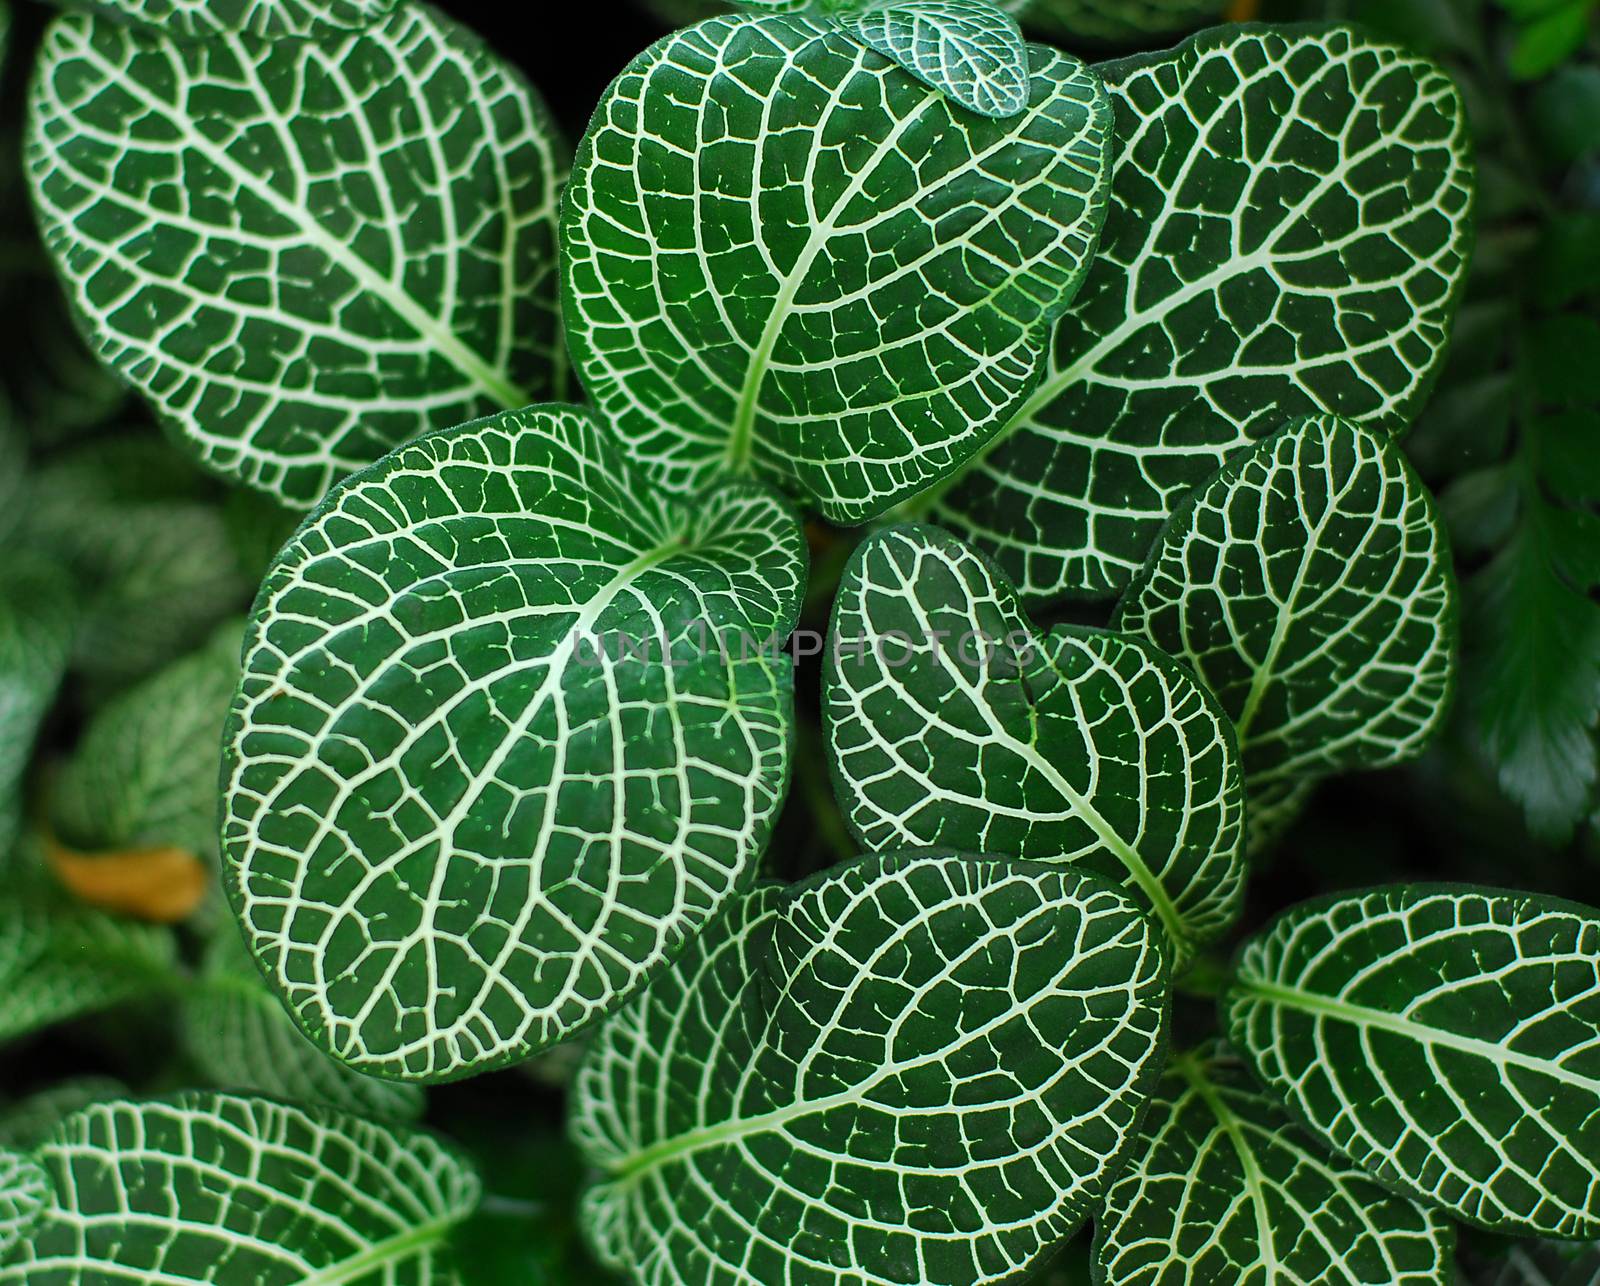 Green Nerve Plant Leaves by nikonite